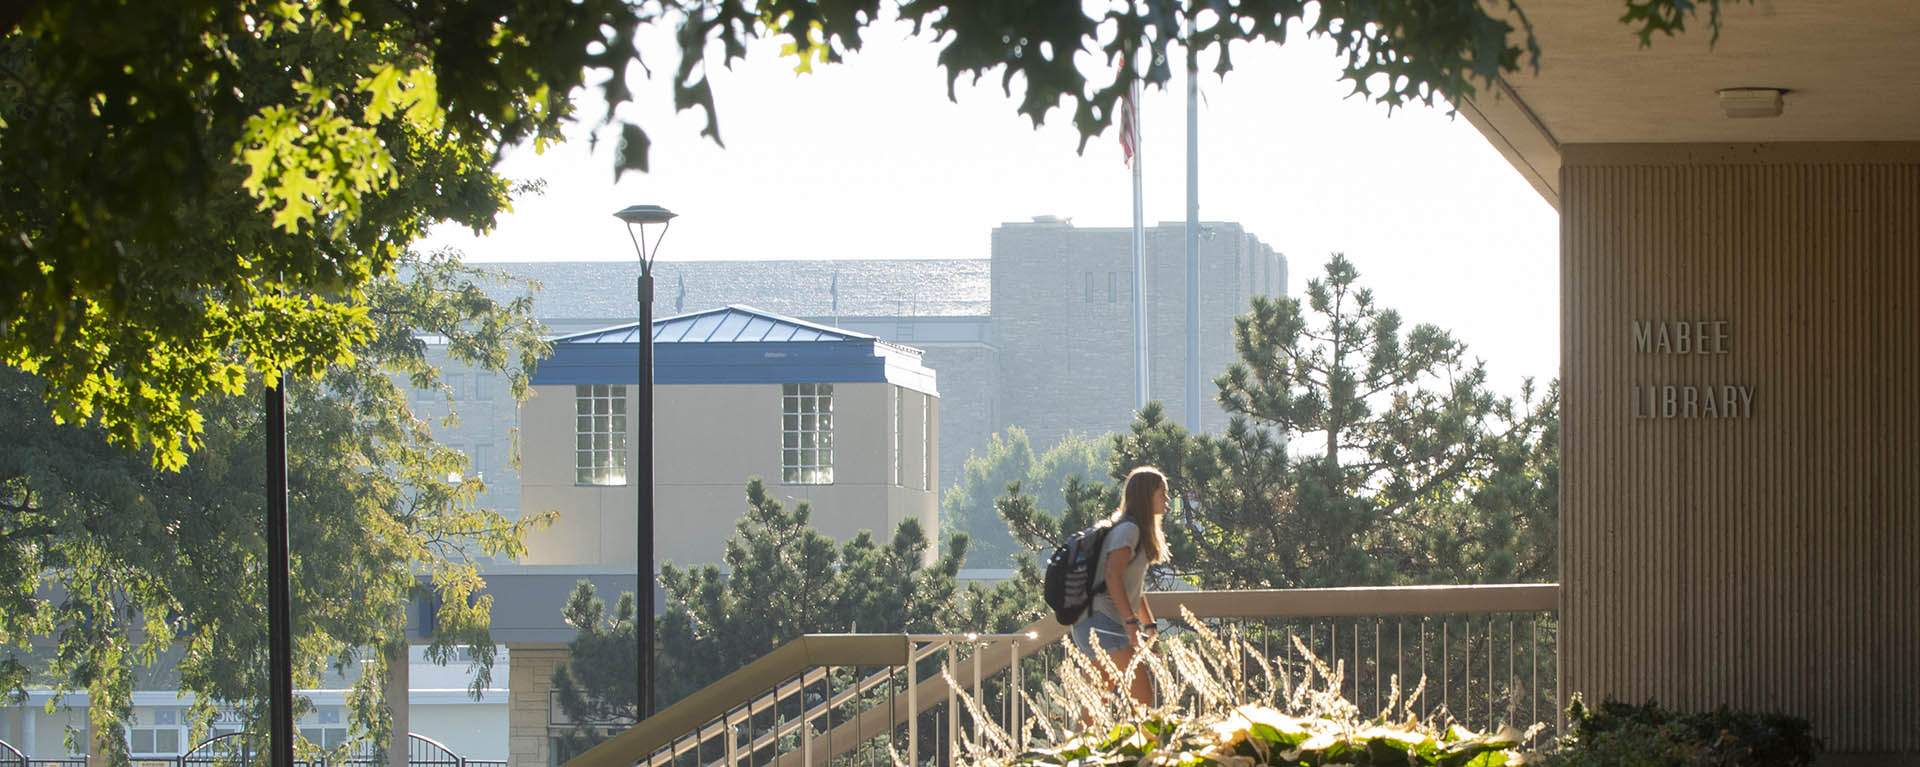 Early morning lights touches the landscaping as a student carrying a backpack walks into the library.